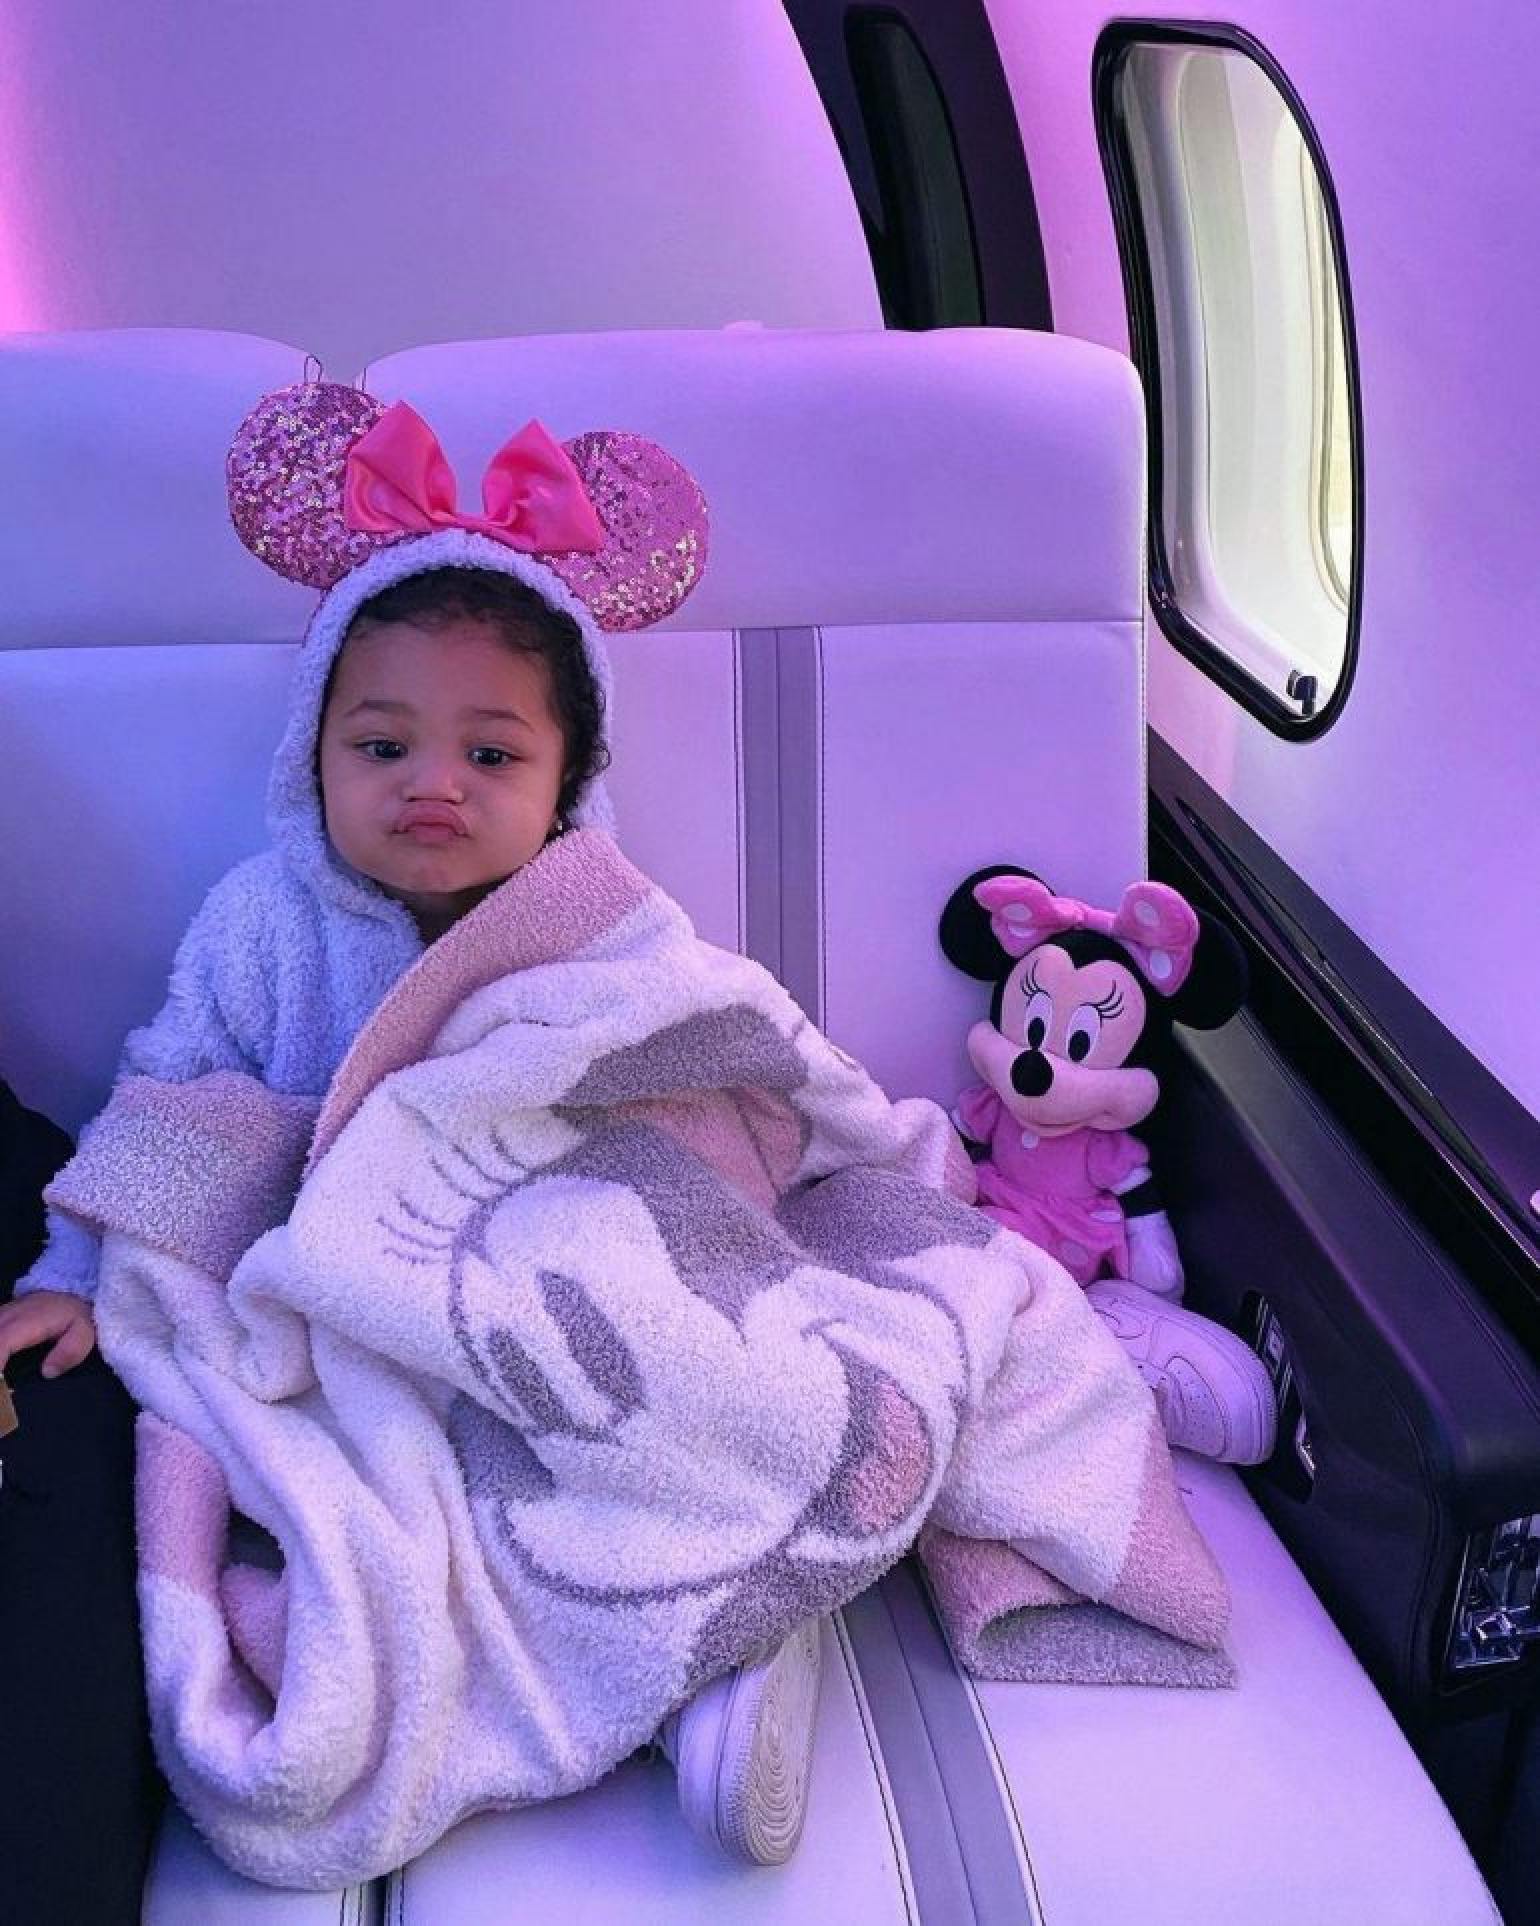 Kylie Jenner shares picture of daughter Stormi, 2, with Prada